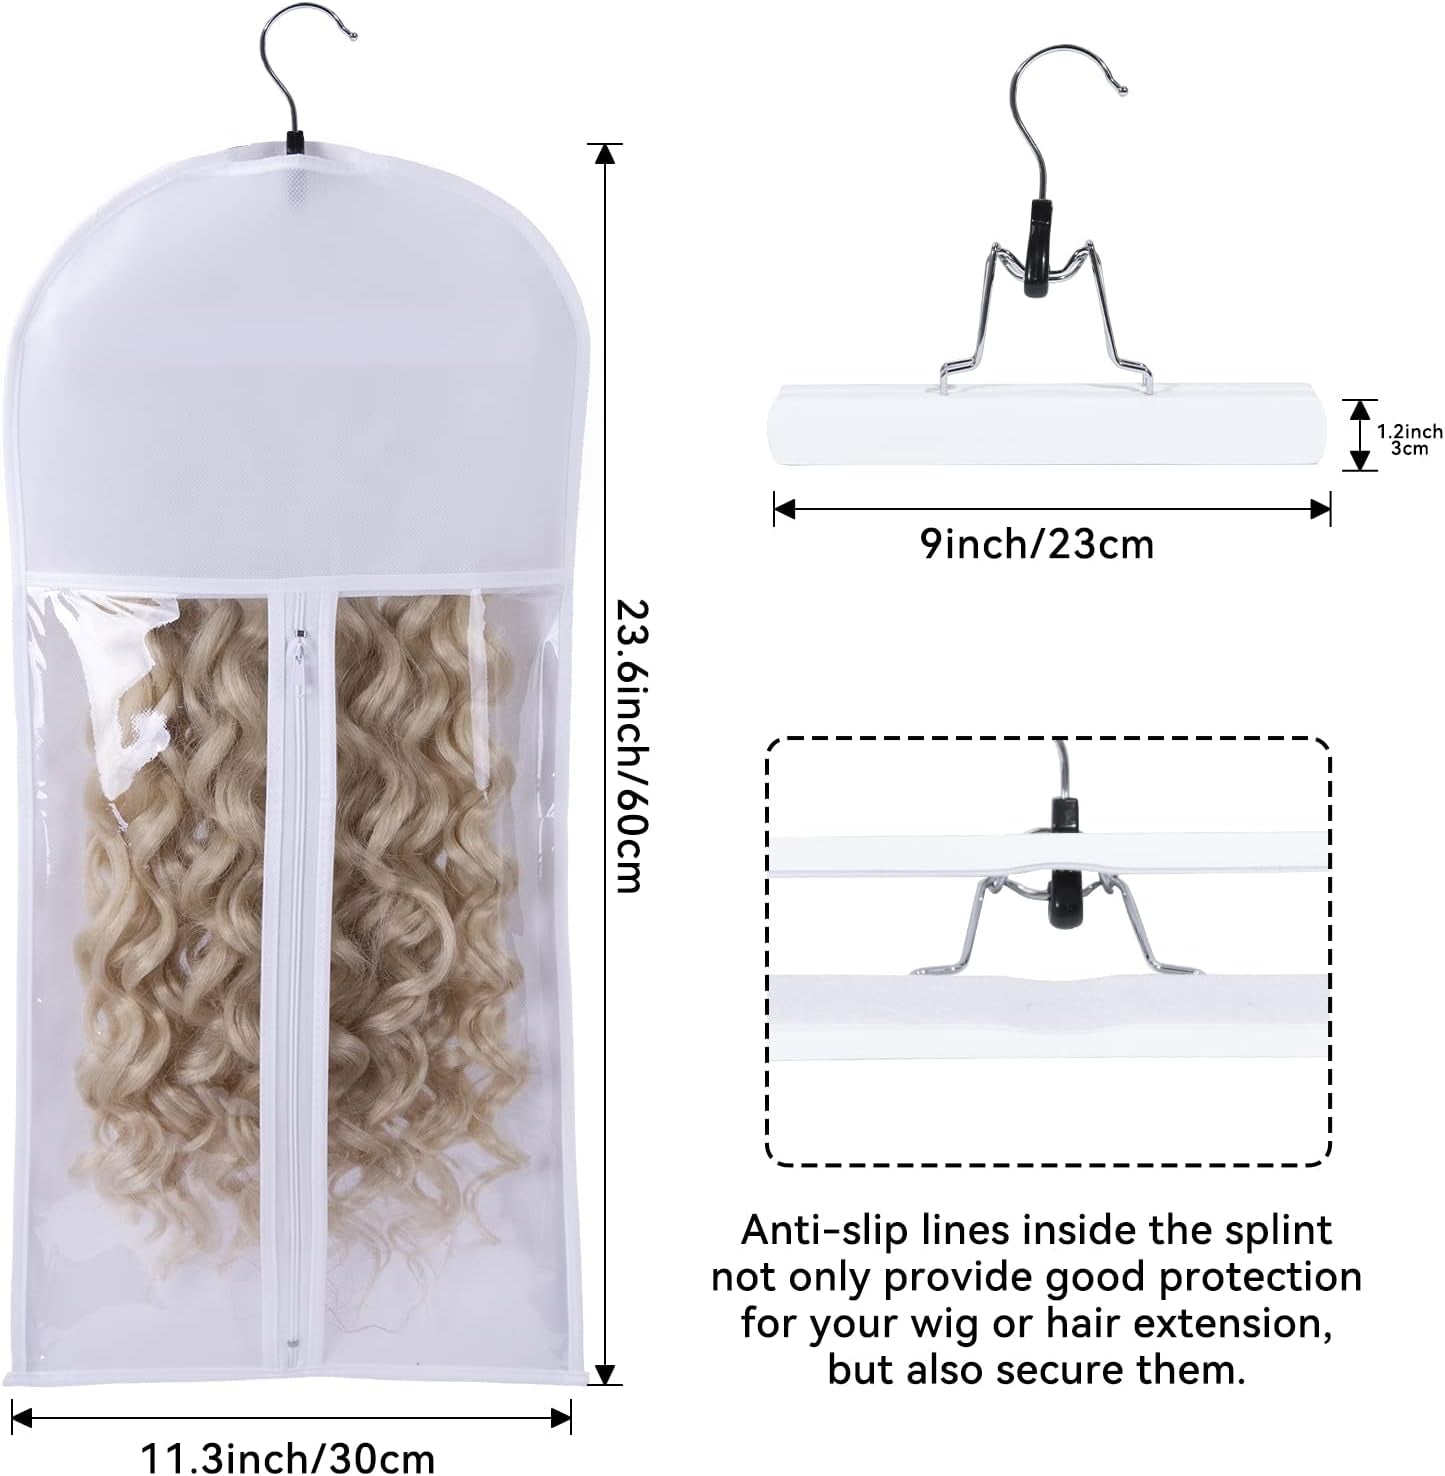 Wig Bag Wig Storage Hair Extension Holder Hair Extension Storage Wig Bags Storage with Hanger Wig Storage for Multiple Wigs Hanger Hair Extensions, Wigs & Accessories (3PCS/WHITE)